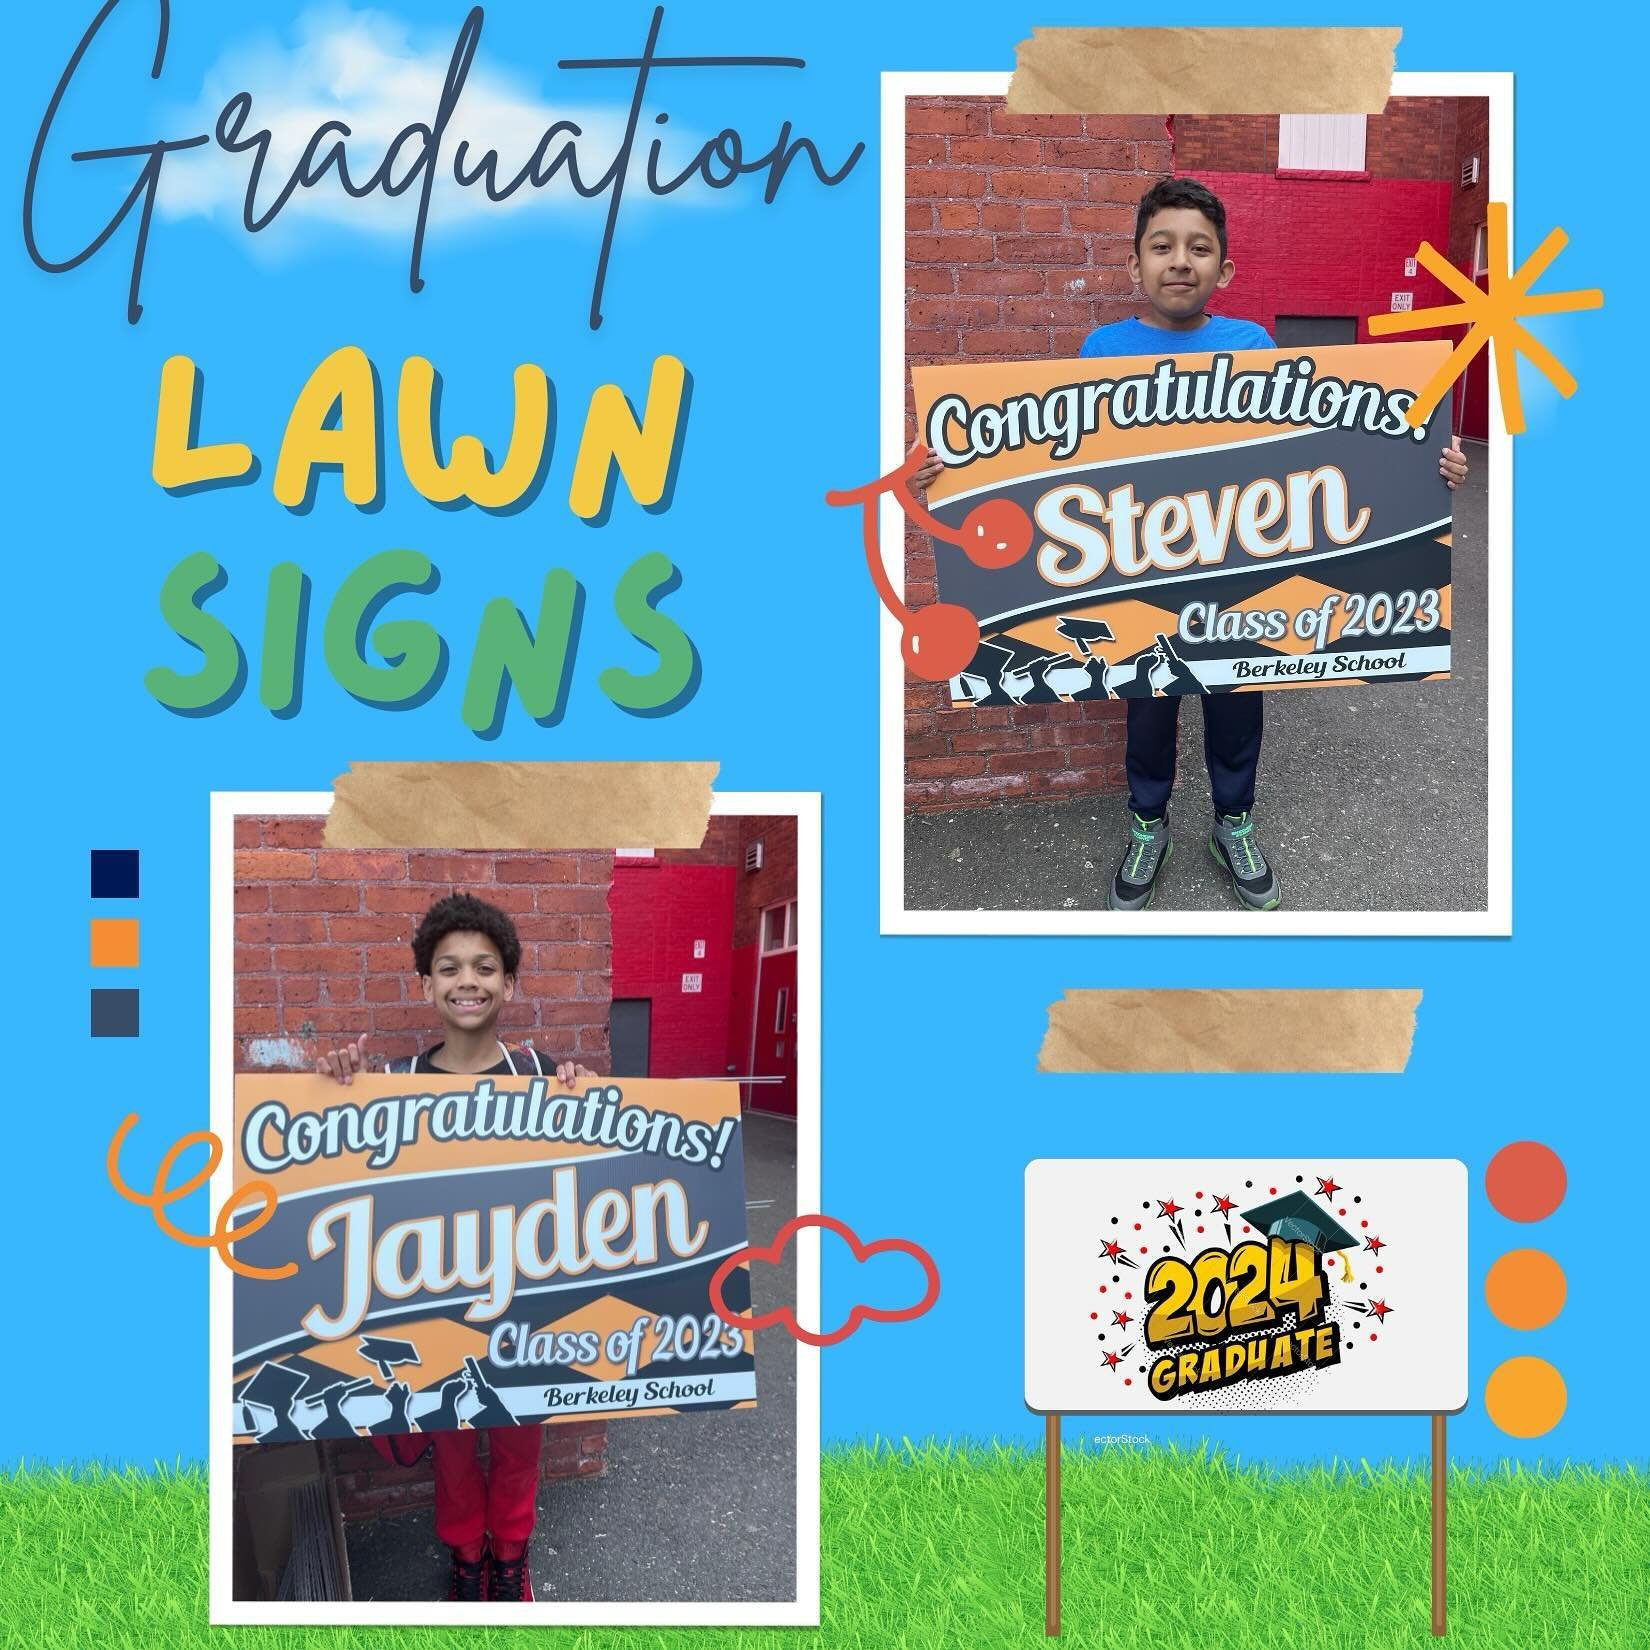 Hello families! A Bloomfield Township resident (Lawrence Marino) makes lawn signs for graduates. (This is not something provided through the school.) They are a cute way to acknowledge your graduate leading up to the days of graduation!

COST: 
❍ $35